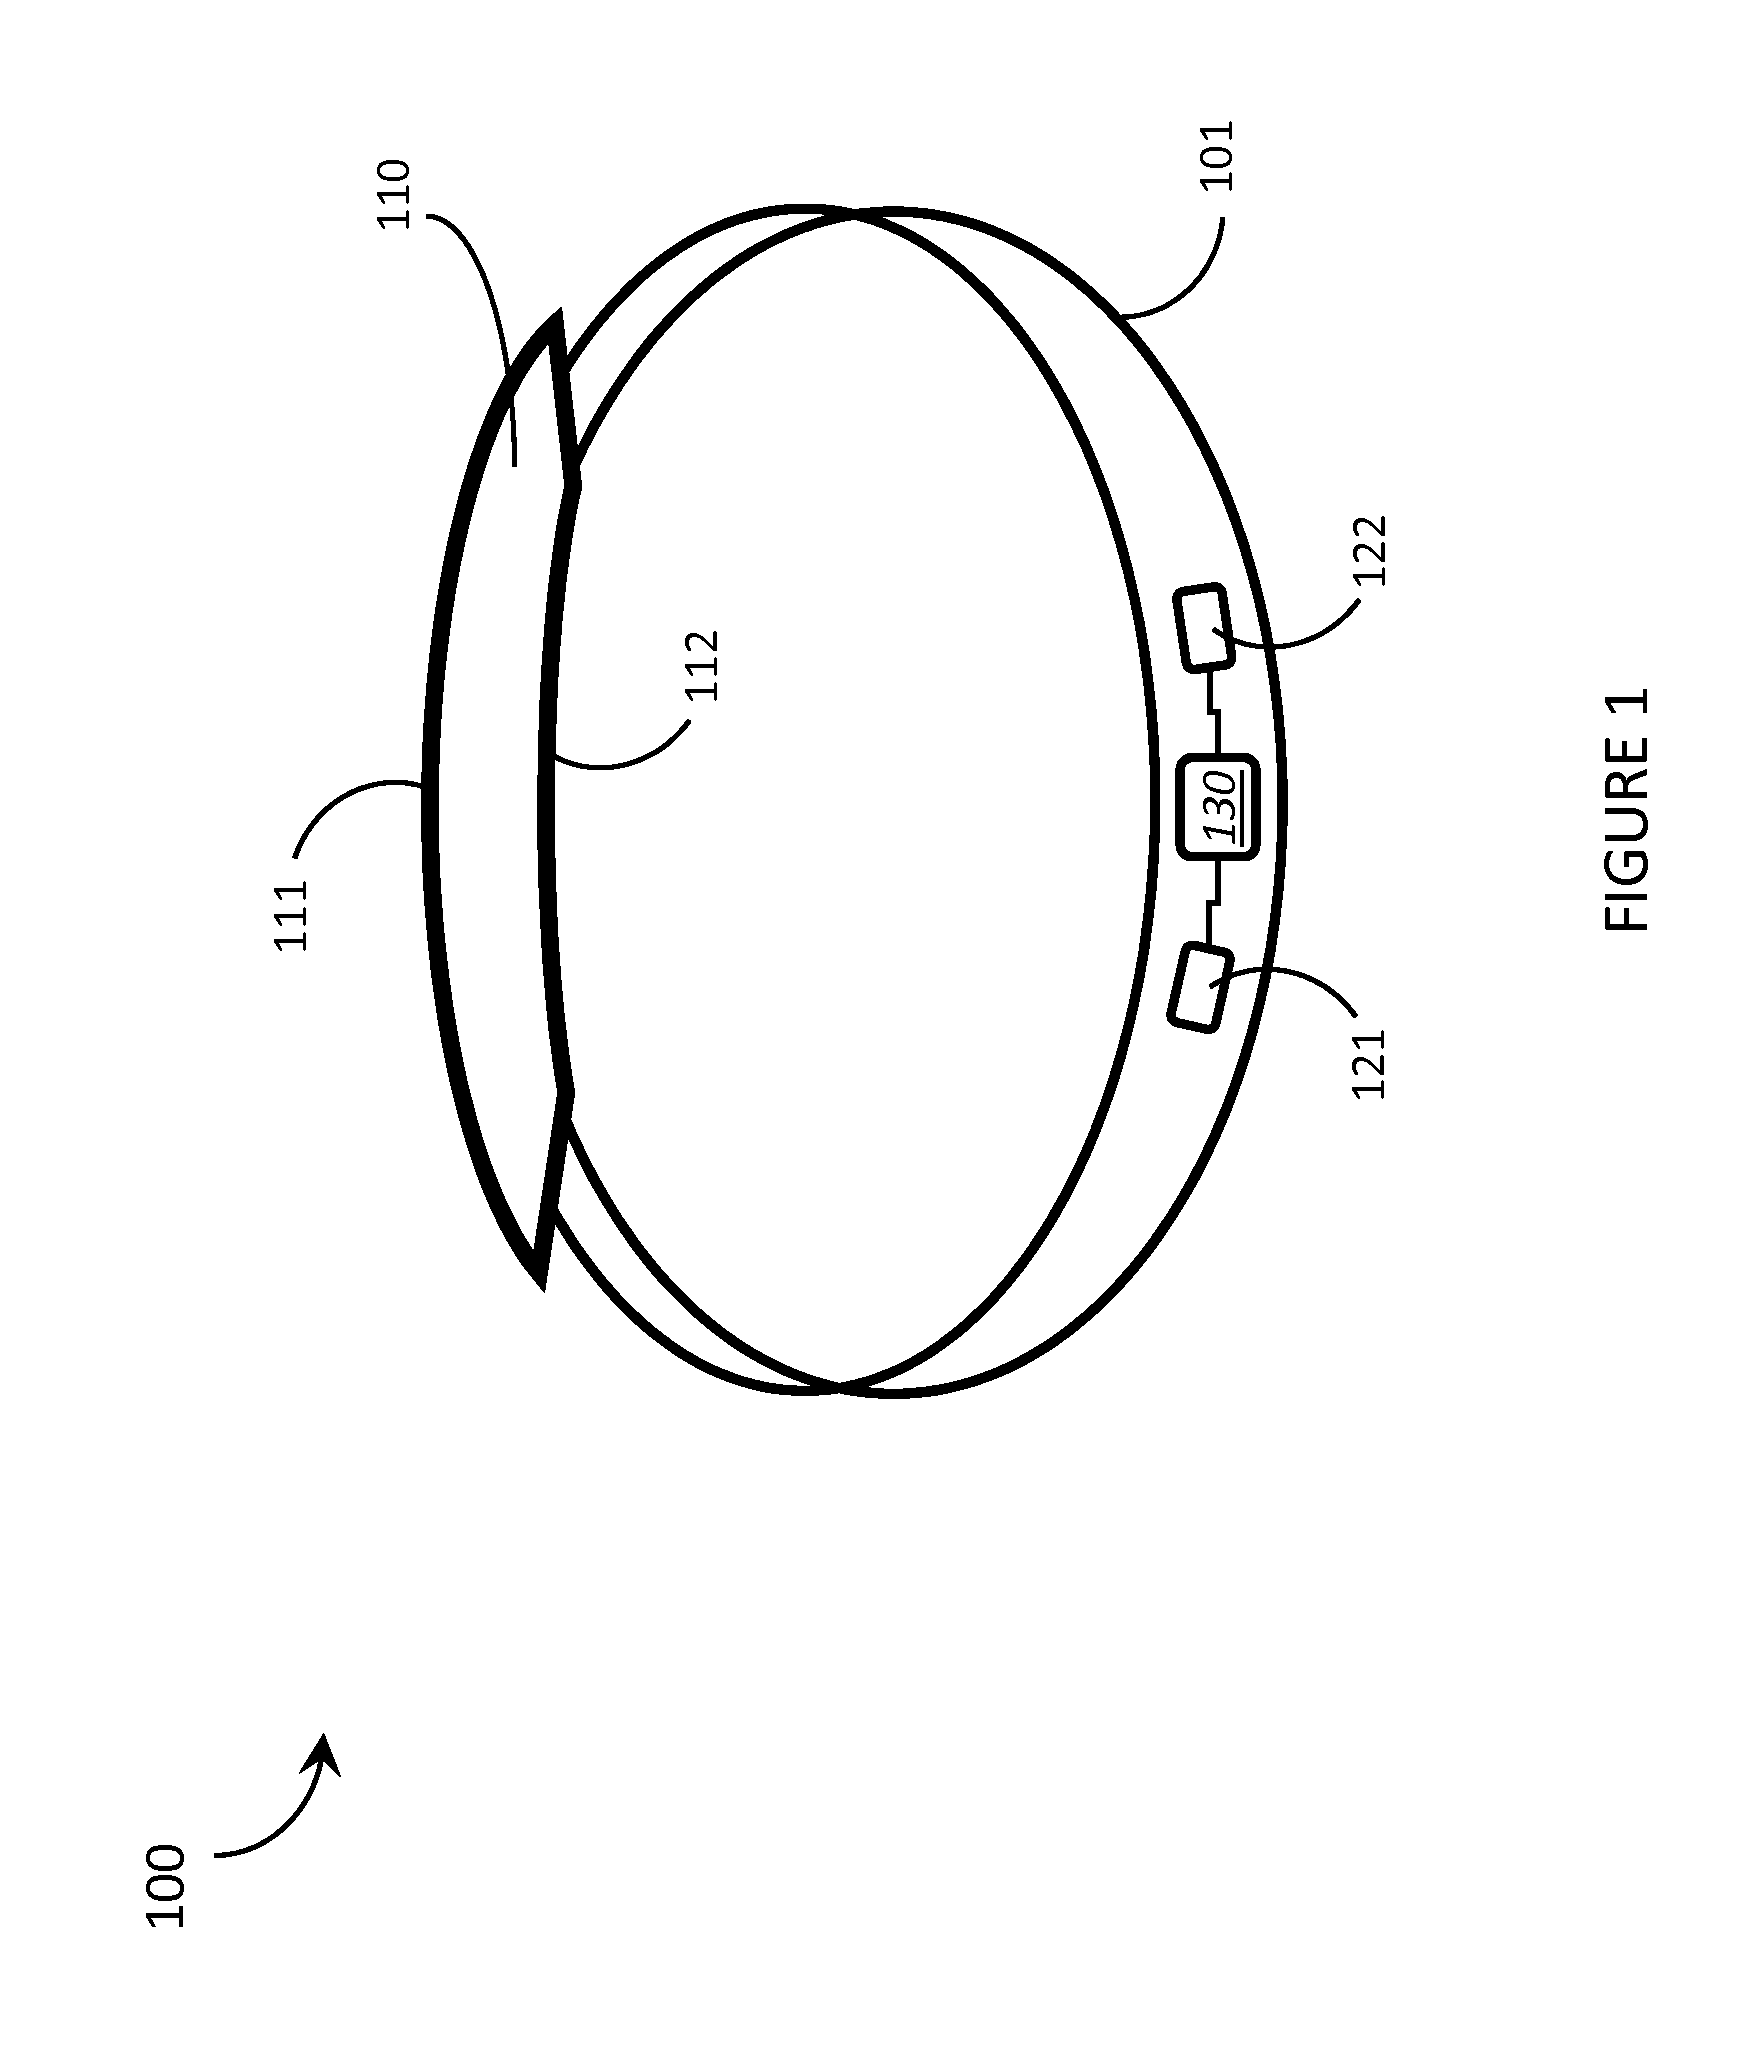 Systems, articles and methods for wearable electronic devices employing contact sensors